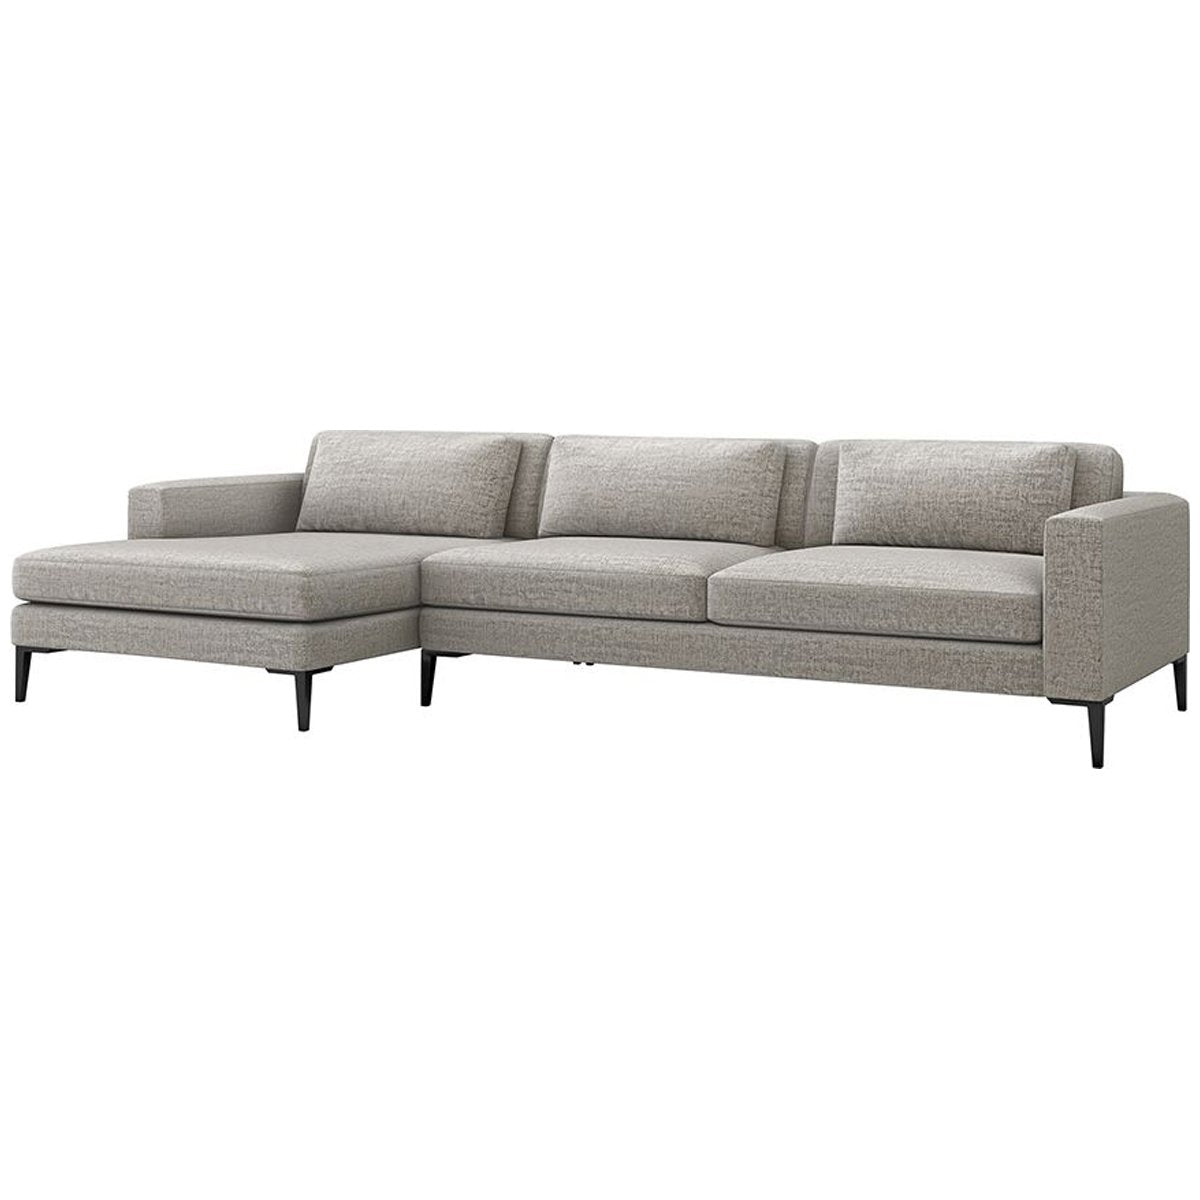 Interlude Home Izzy Feather Chaise 2-Piece Sectional